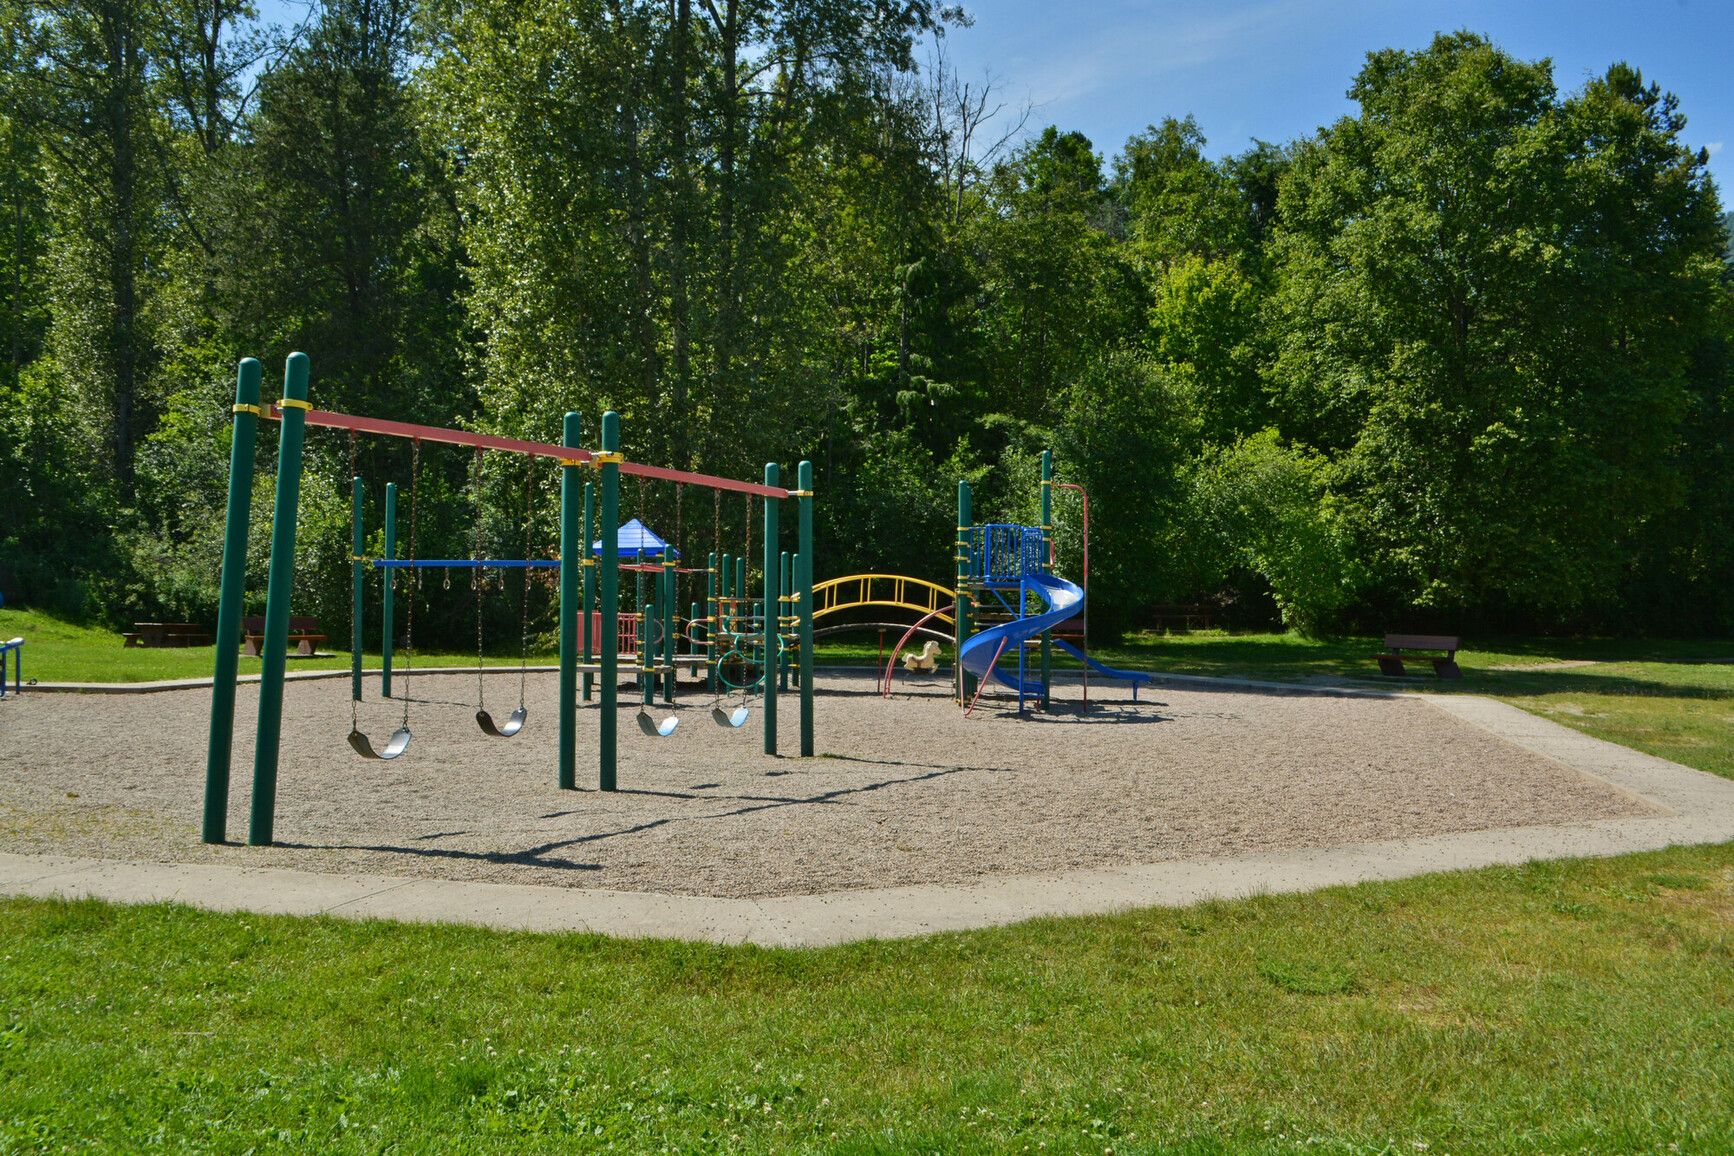 Experience the joy of Kokanee Creek Park's playground at the edge of the forest.